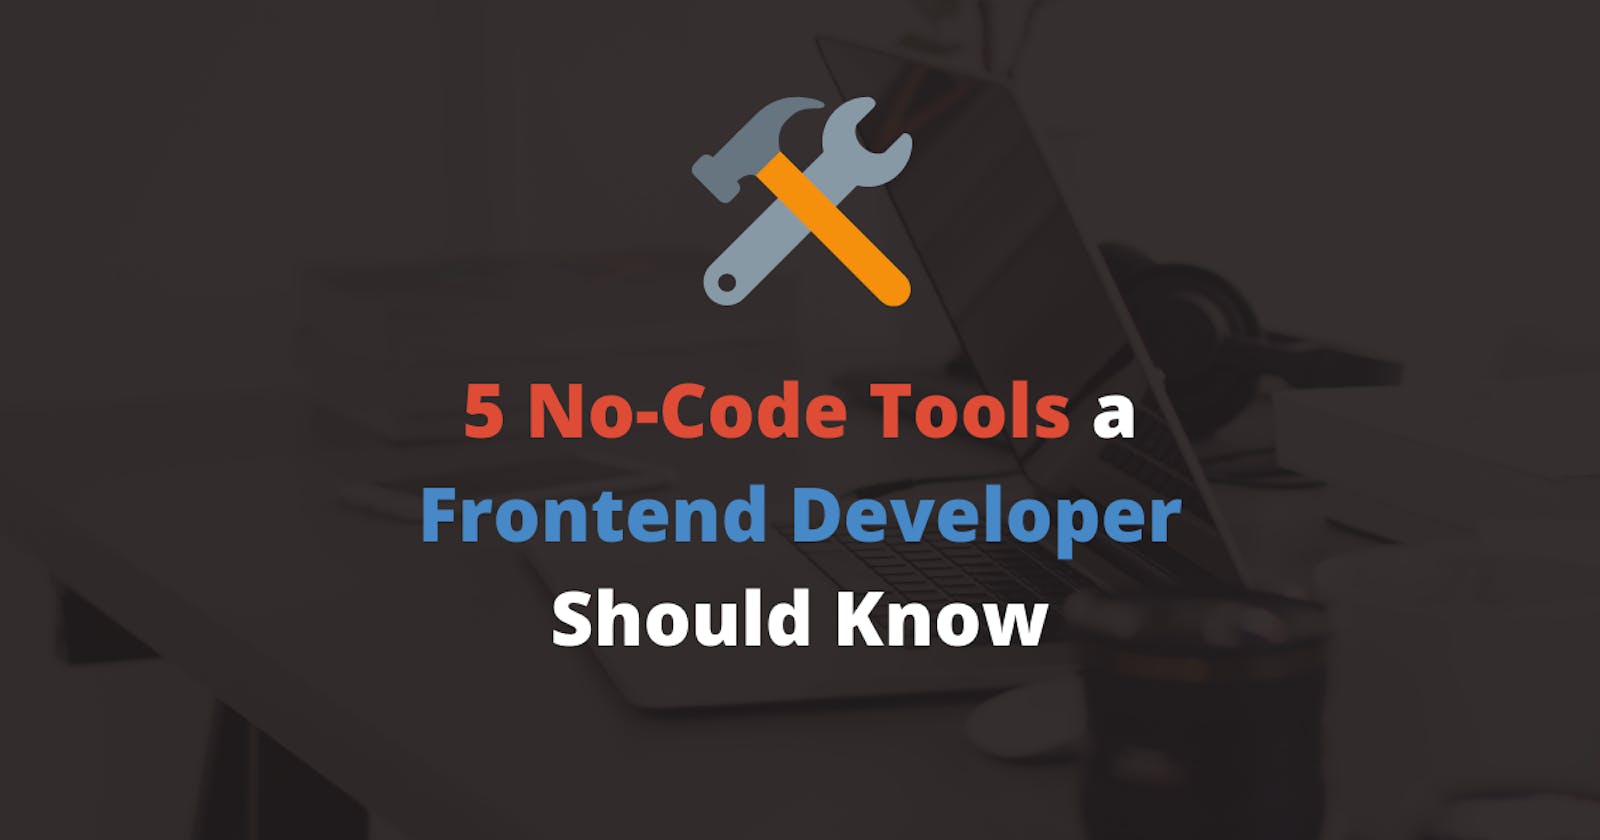 5 No-Code Tools a Frontend Developer Should Know